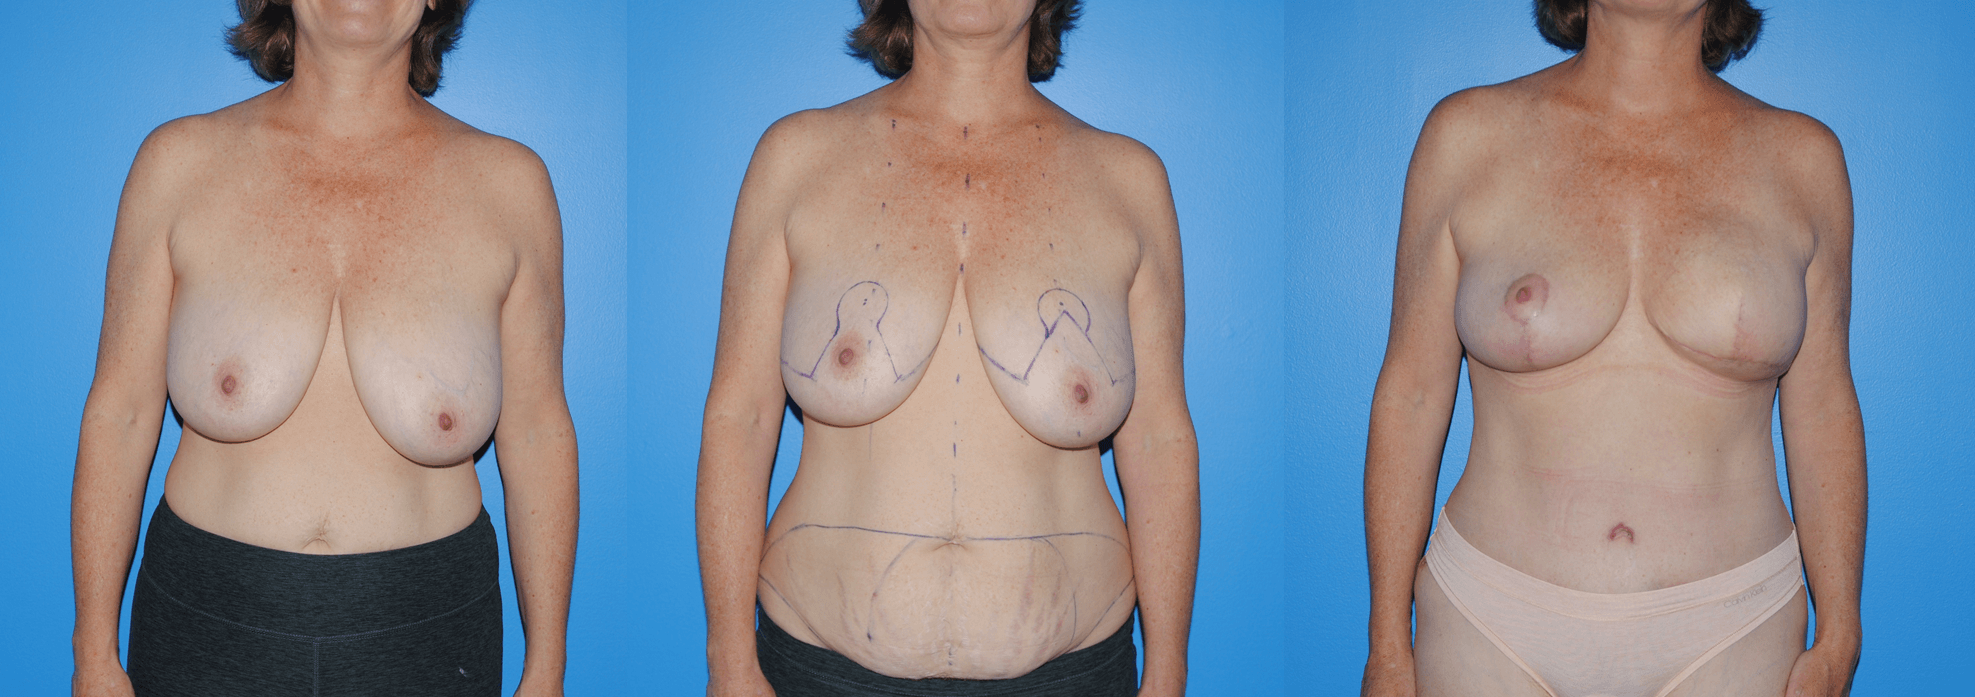 Breast Reconstruction with Autologous Tissue or Flap Reconstruction